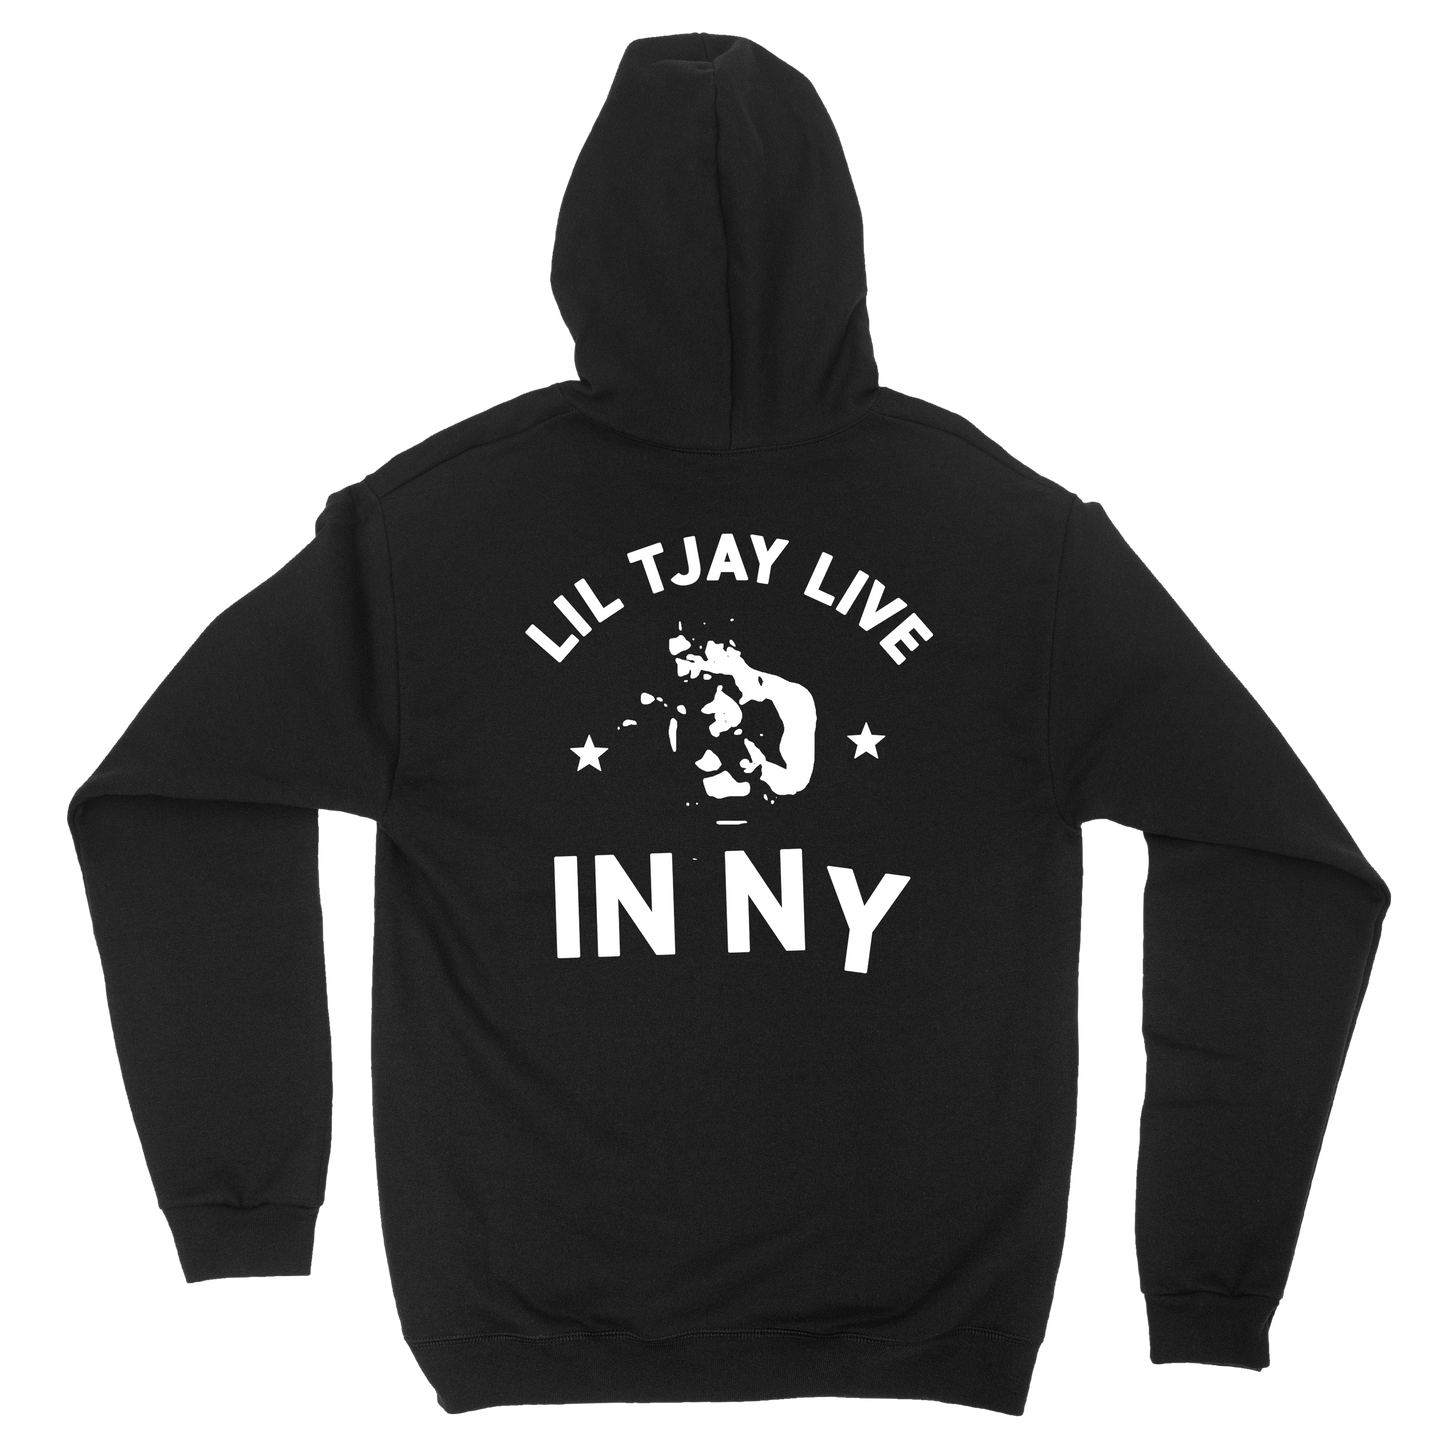 Lil Tjay Live In Ny hoodie